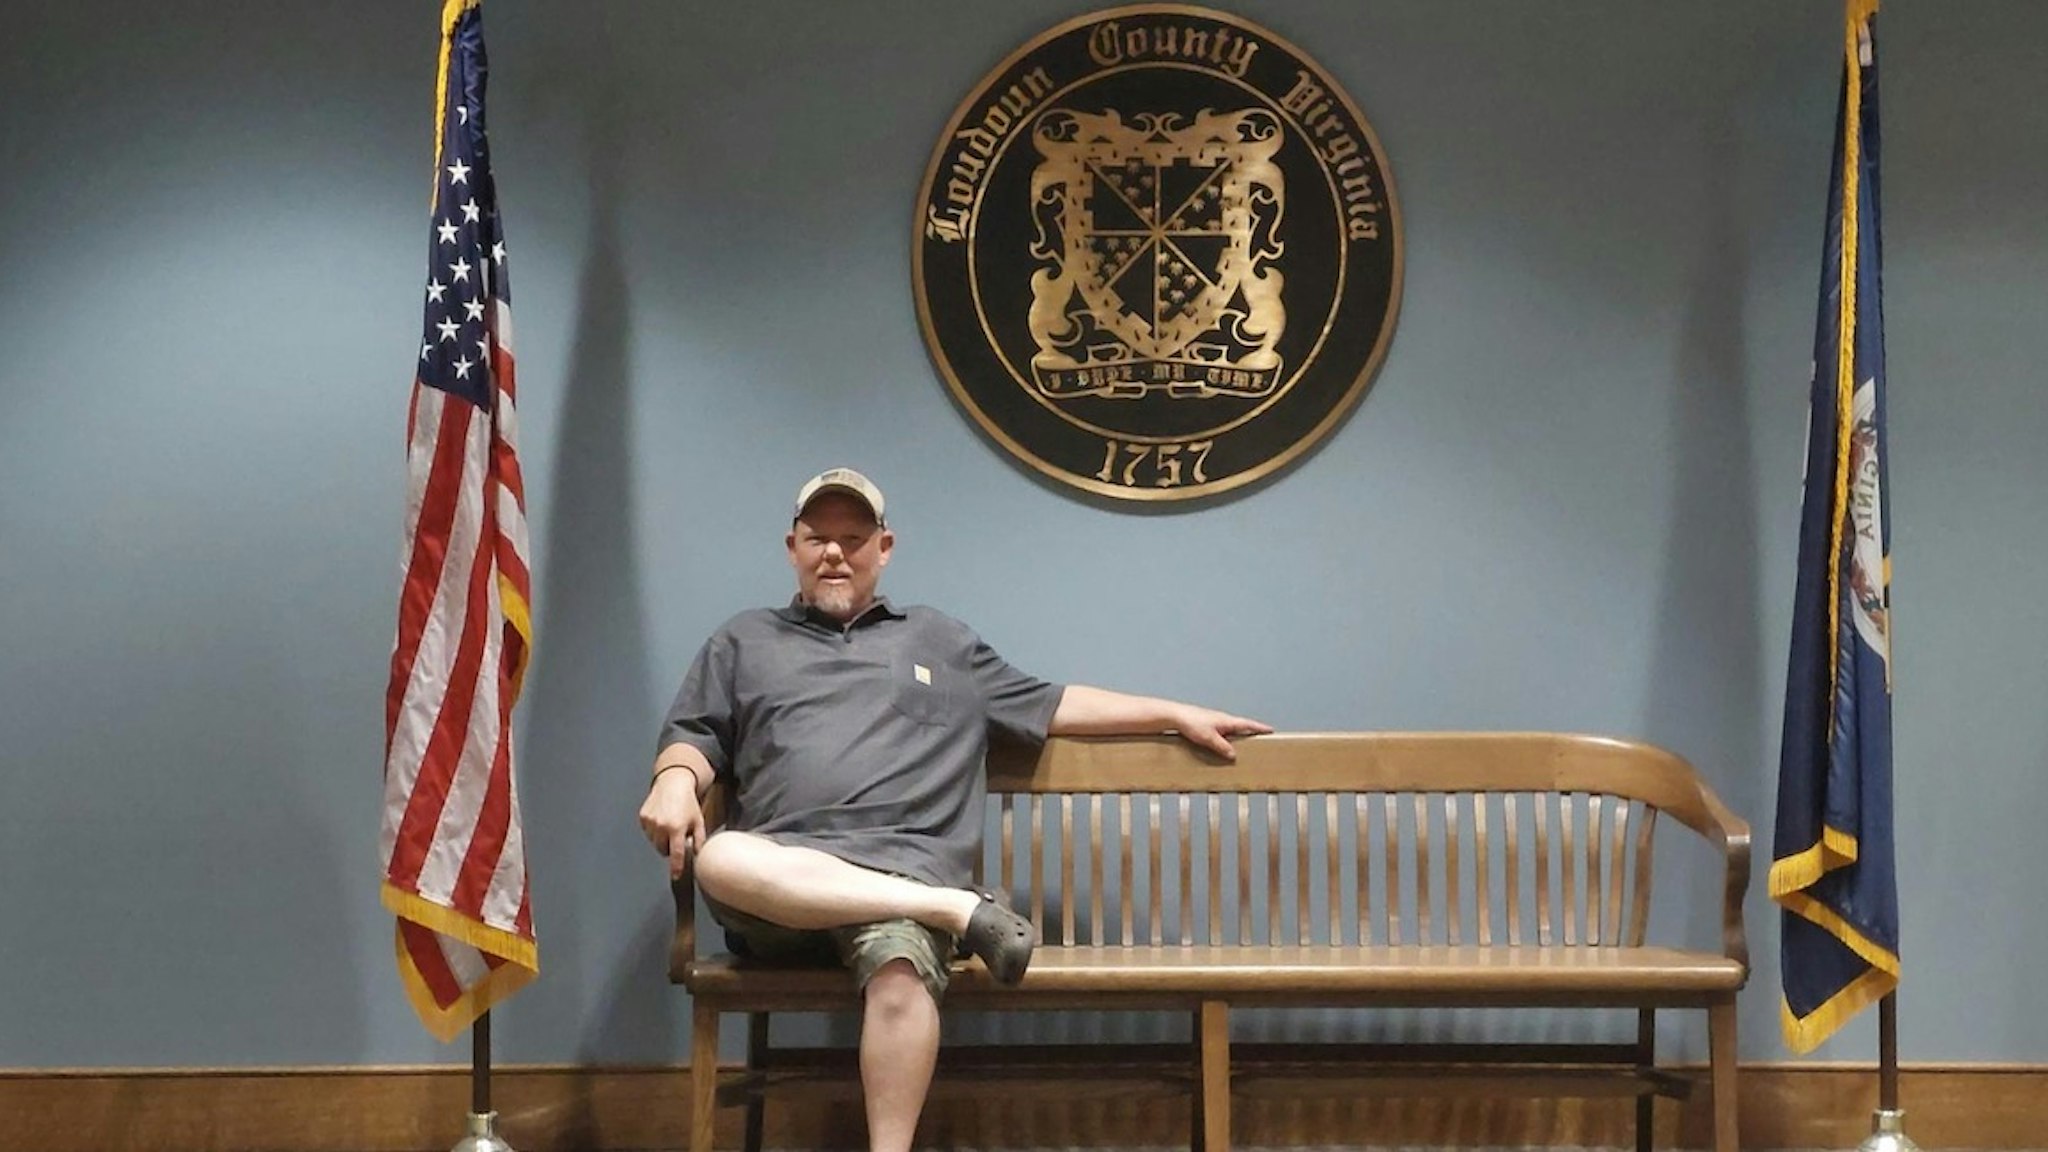 Scott Smith at the Loudoun County Courthouse / The Daily Wire